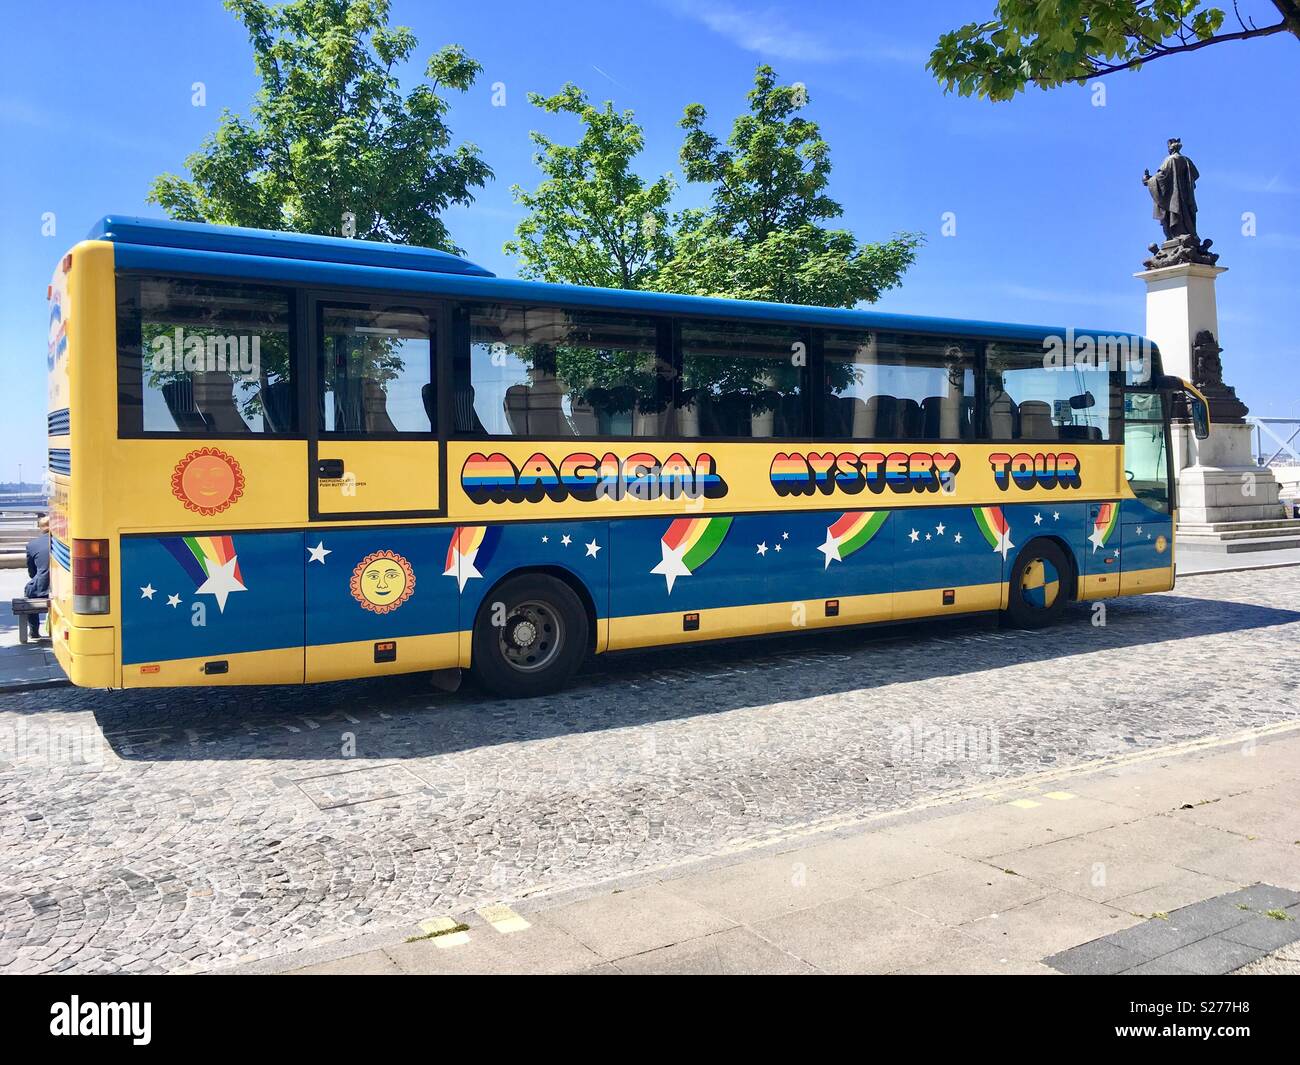 The magical mystery tour bus Stock Photo